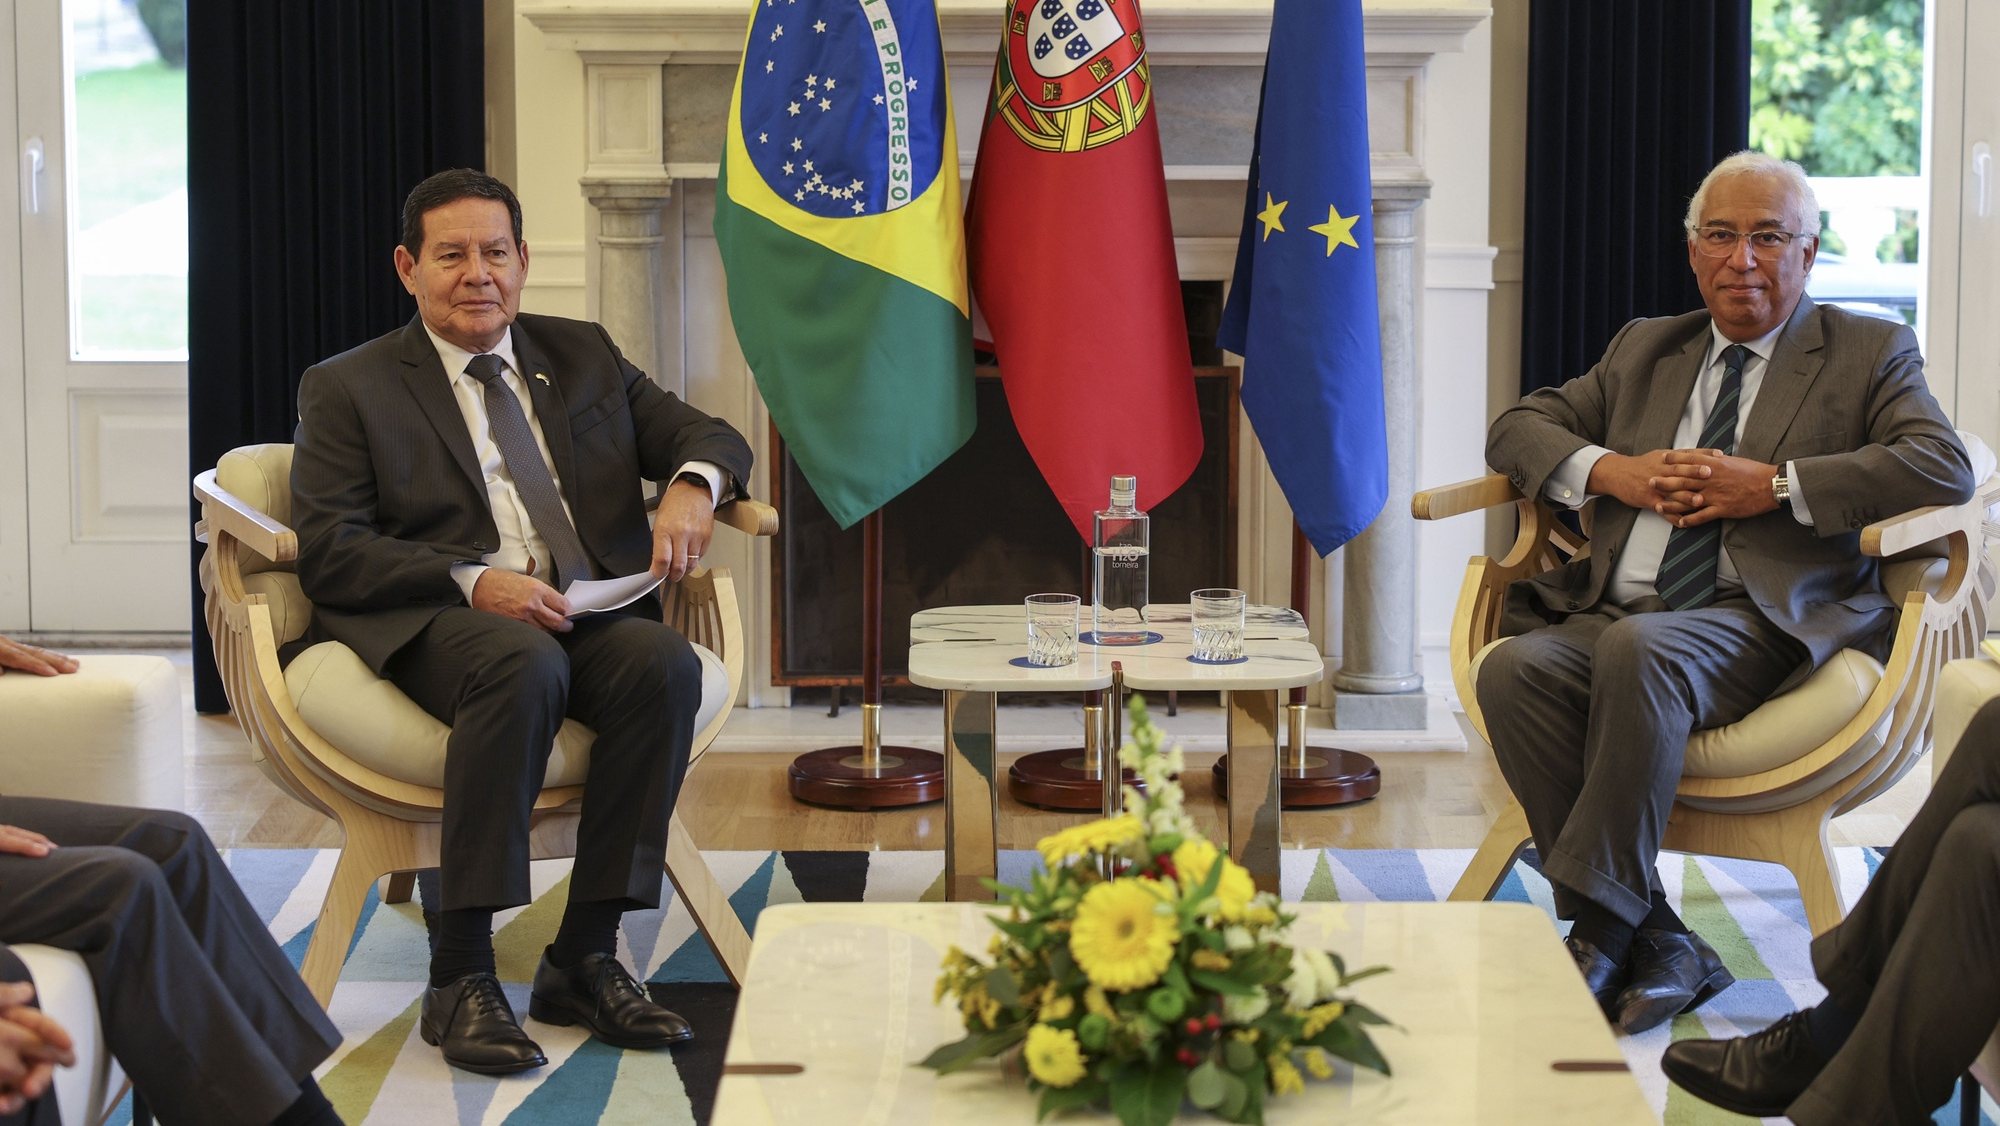 Portuguese Prime Minister Antonio Costa (R) and Brazilian Vice President Hamilton Mourao (L) during a meeting at Sao Bento Palace in Lisbon, Portugal, 22 November 2022. ANDRE KOSTERS/LUSA